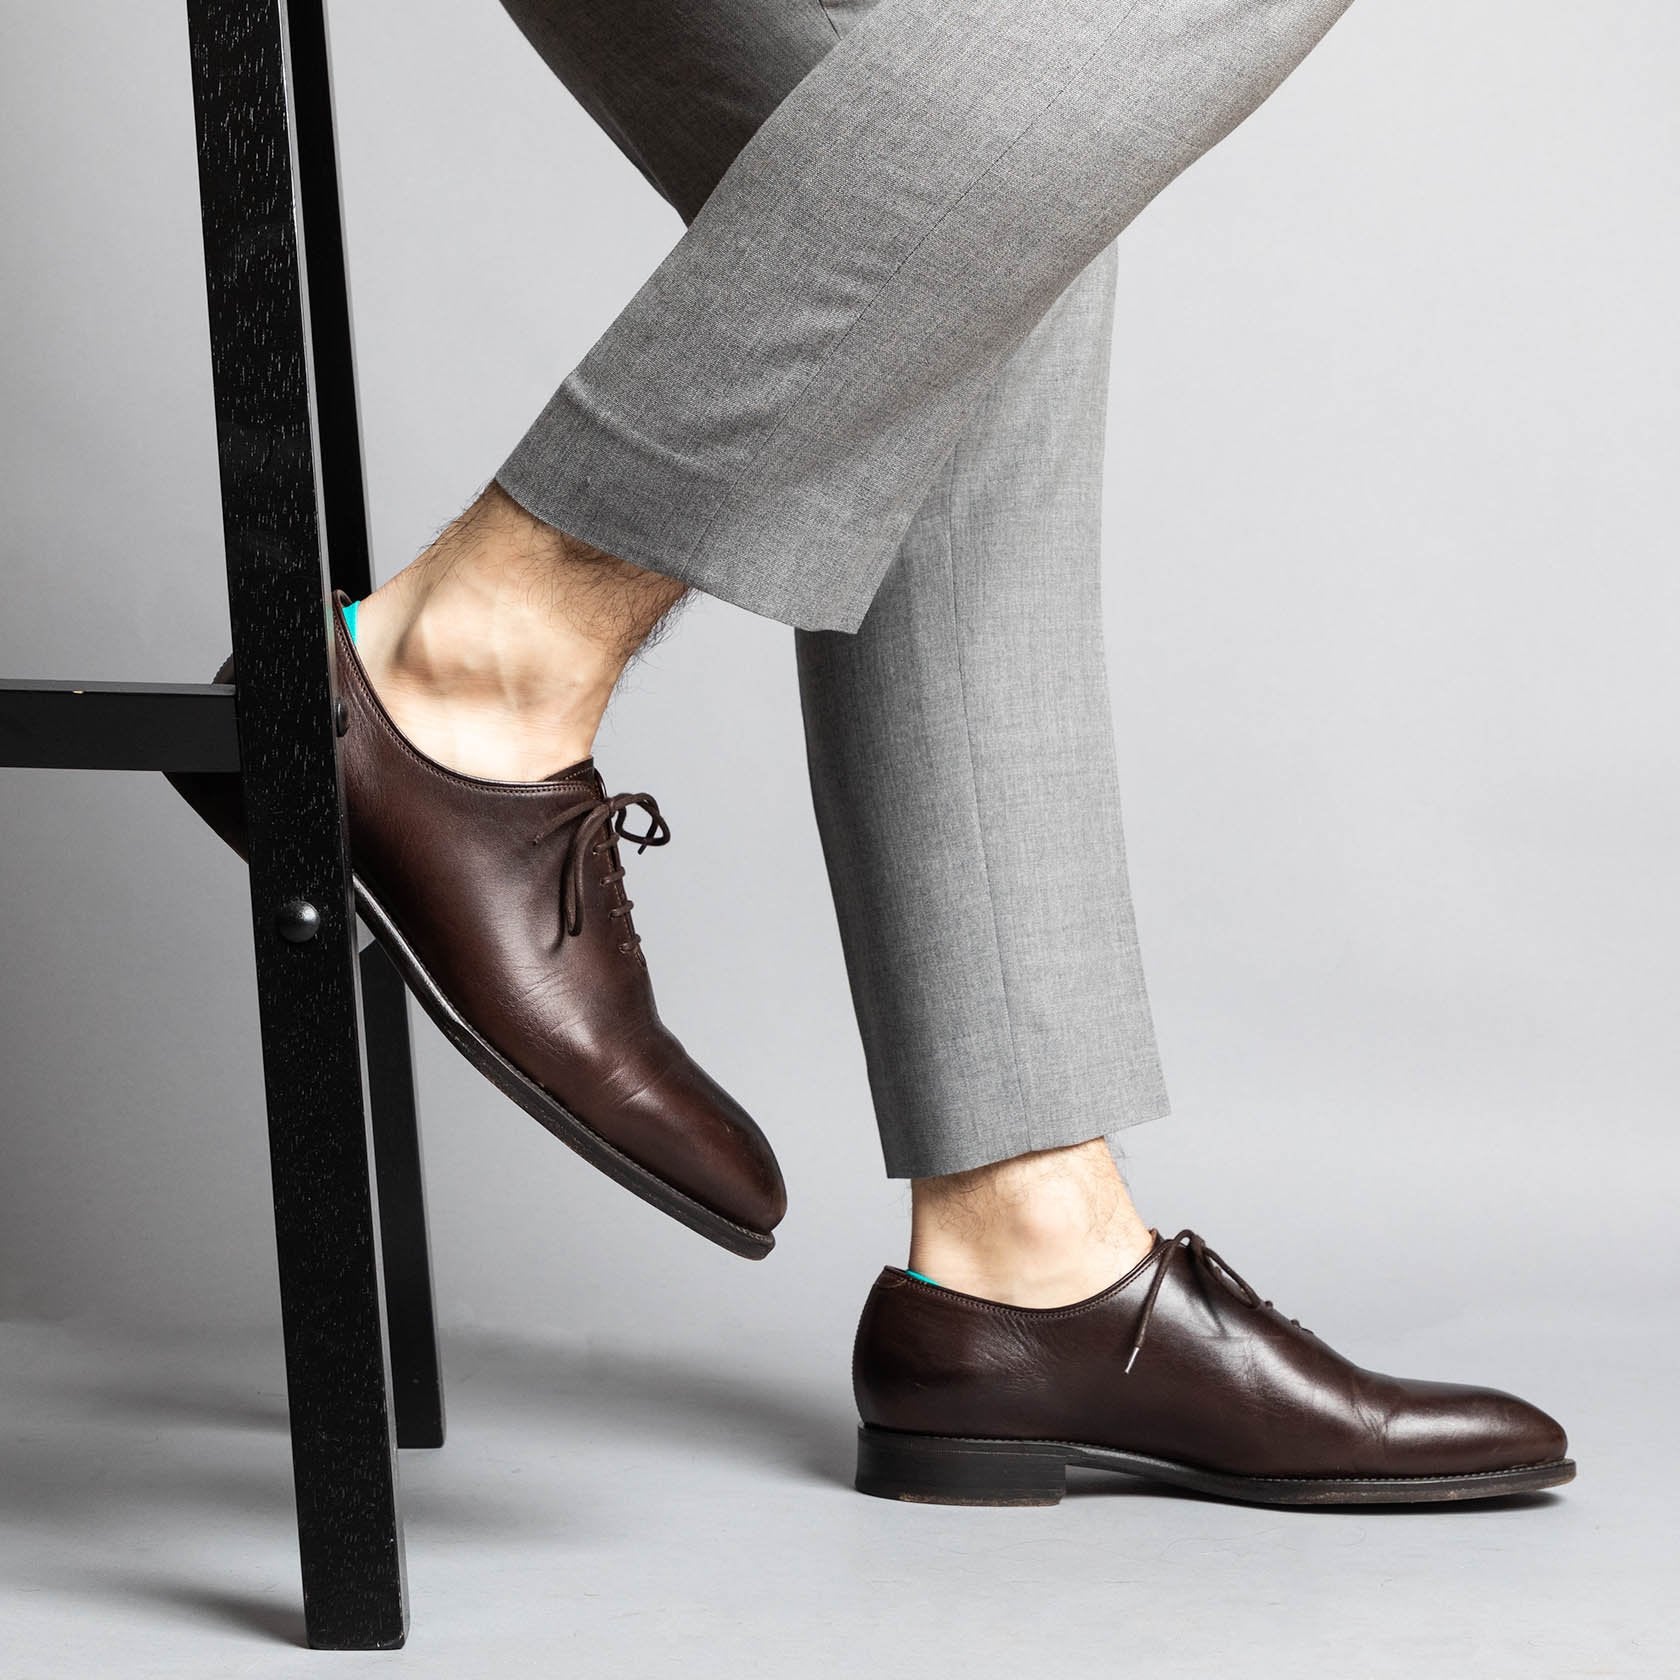 no show socks with dress shoes